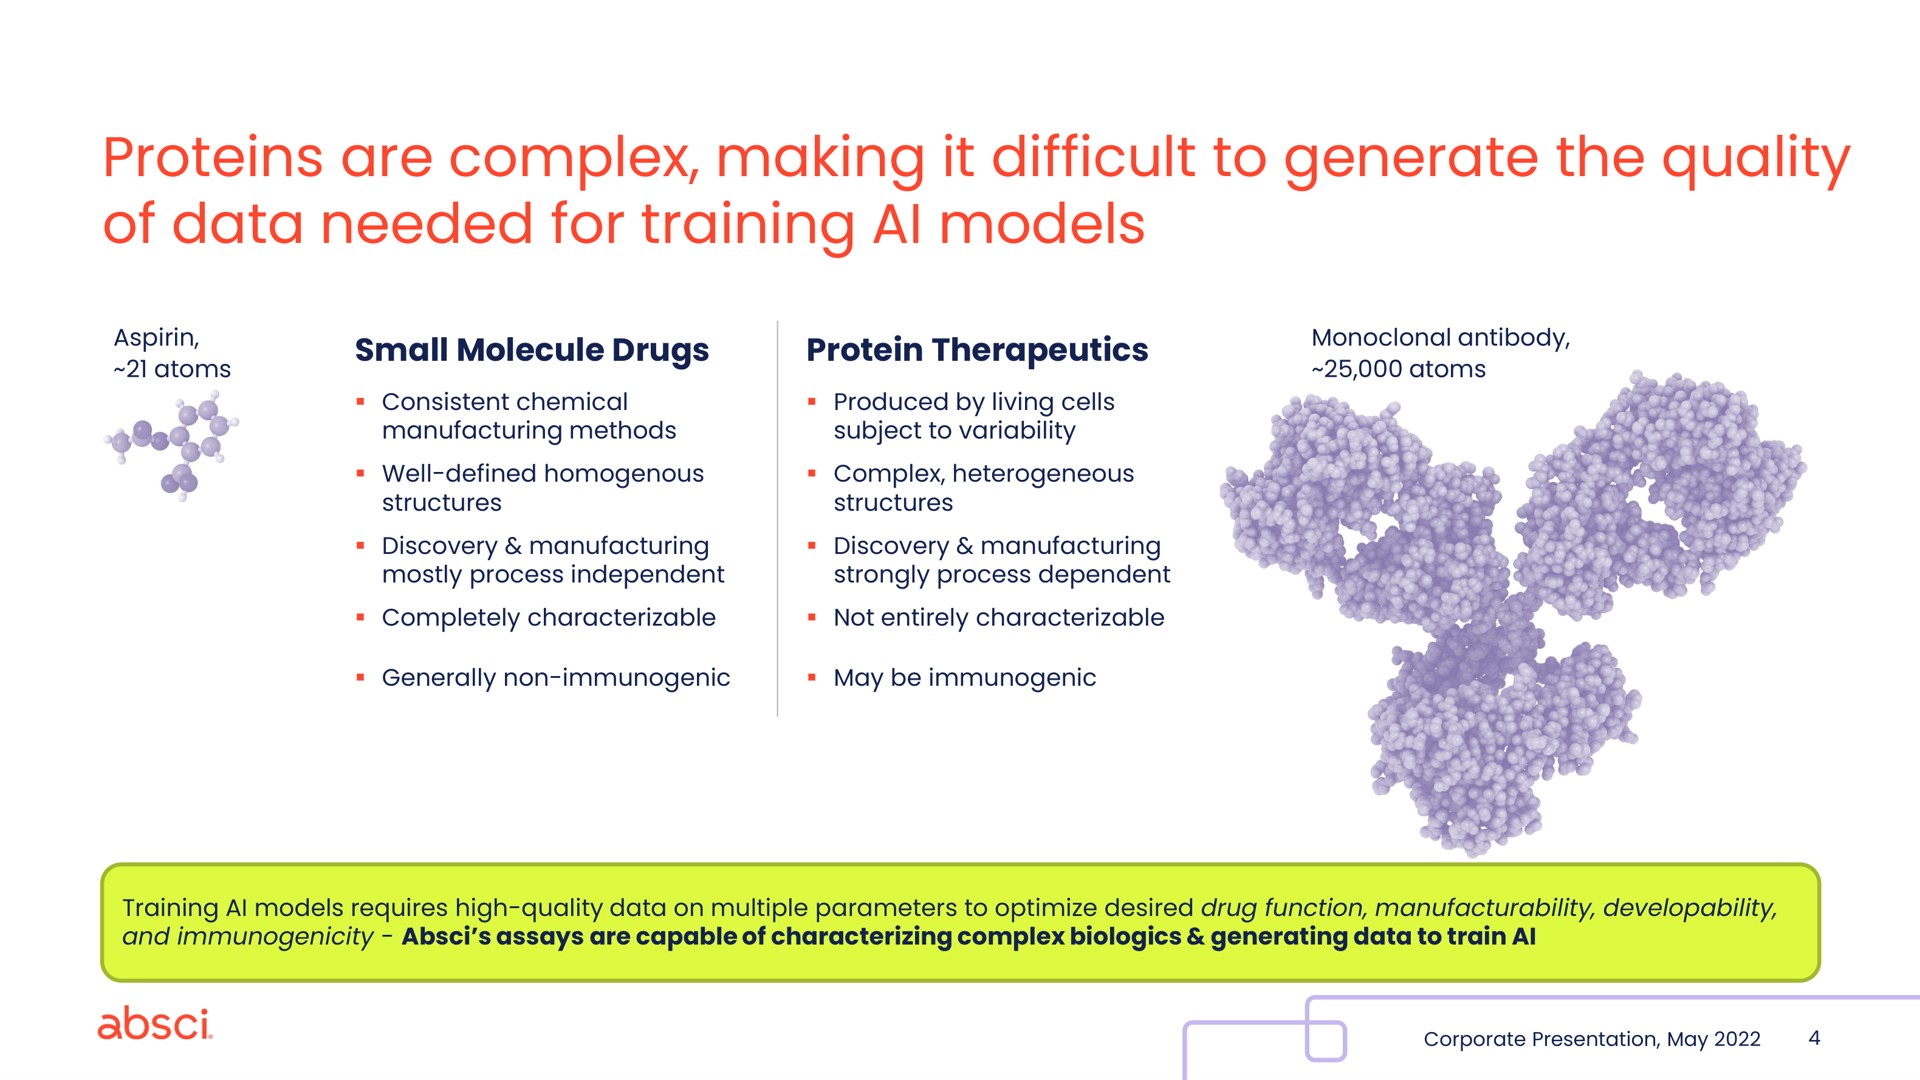 proteins are complex making it difficult to generate the quality of data needed for training models | Absci